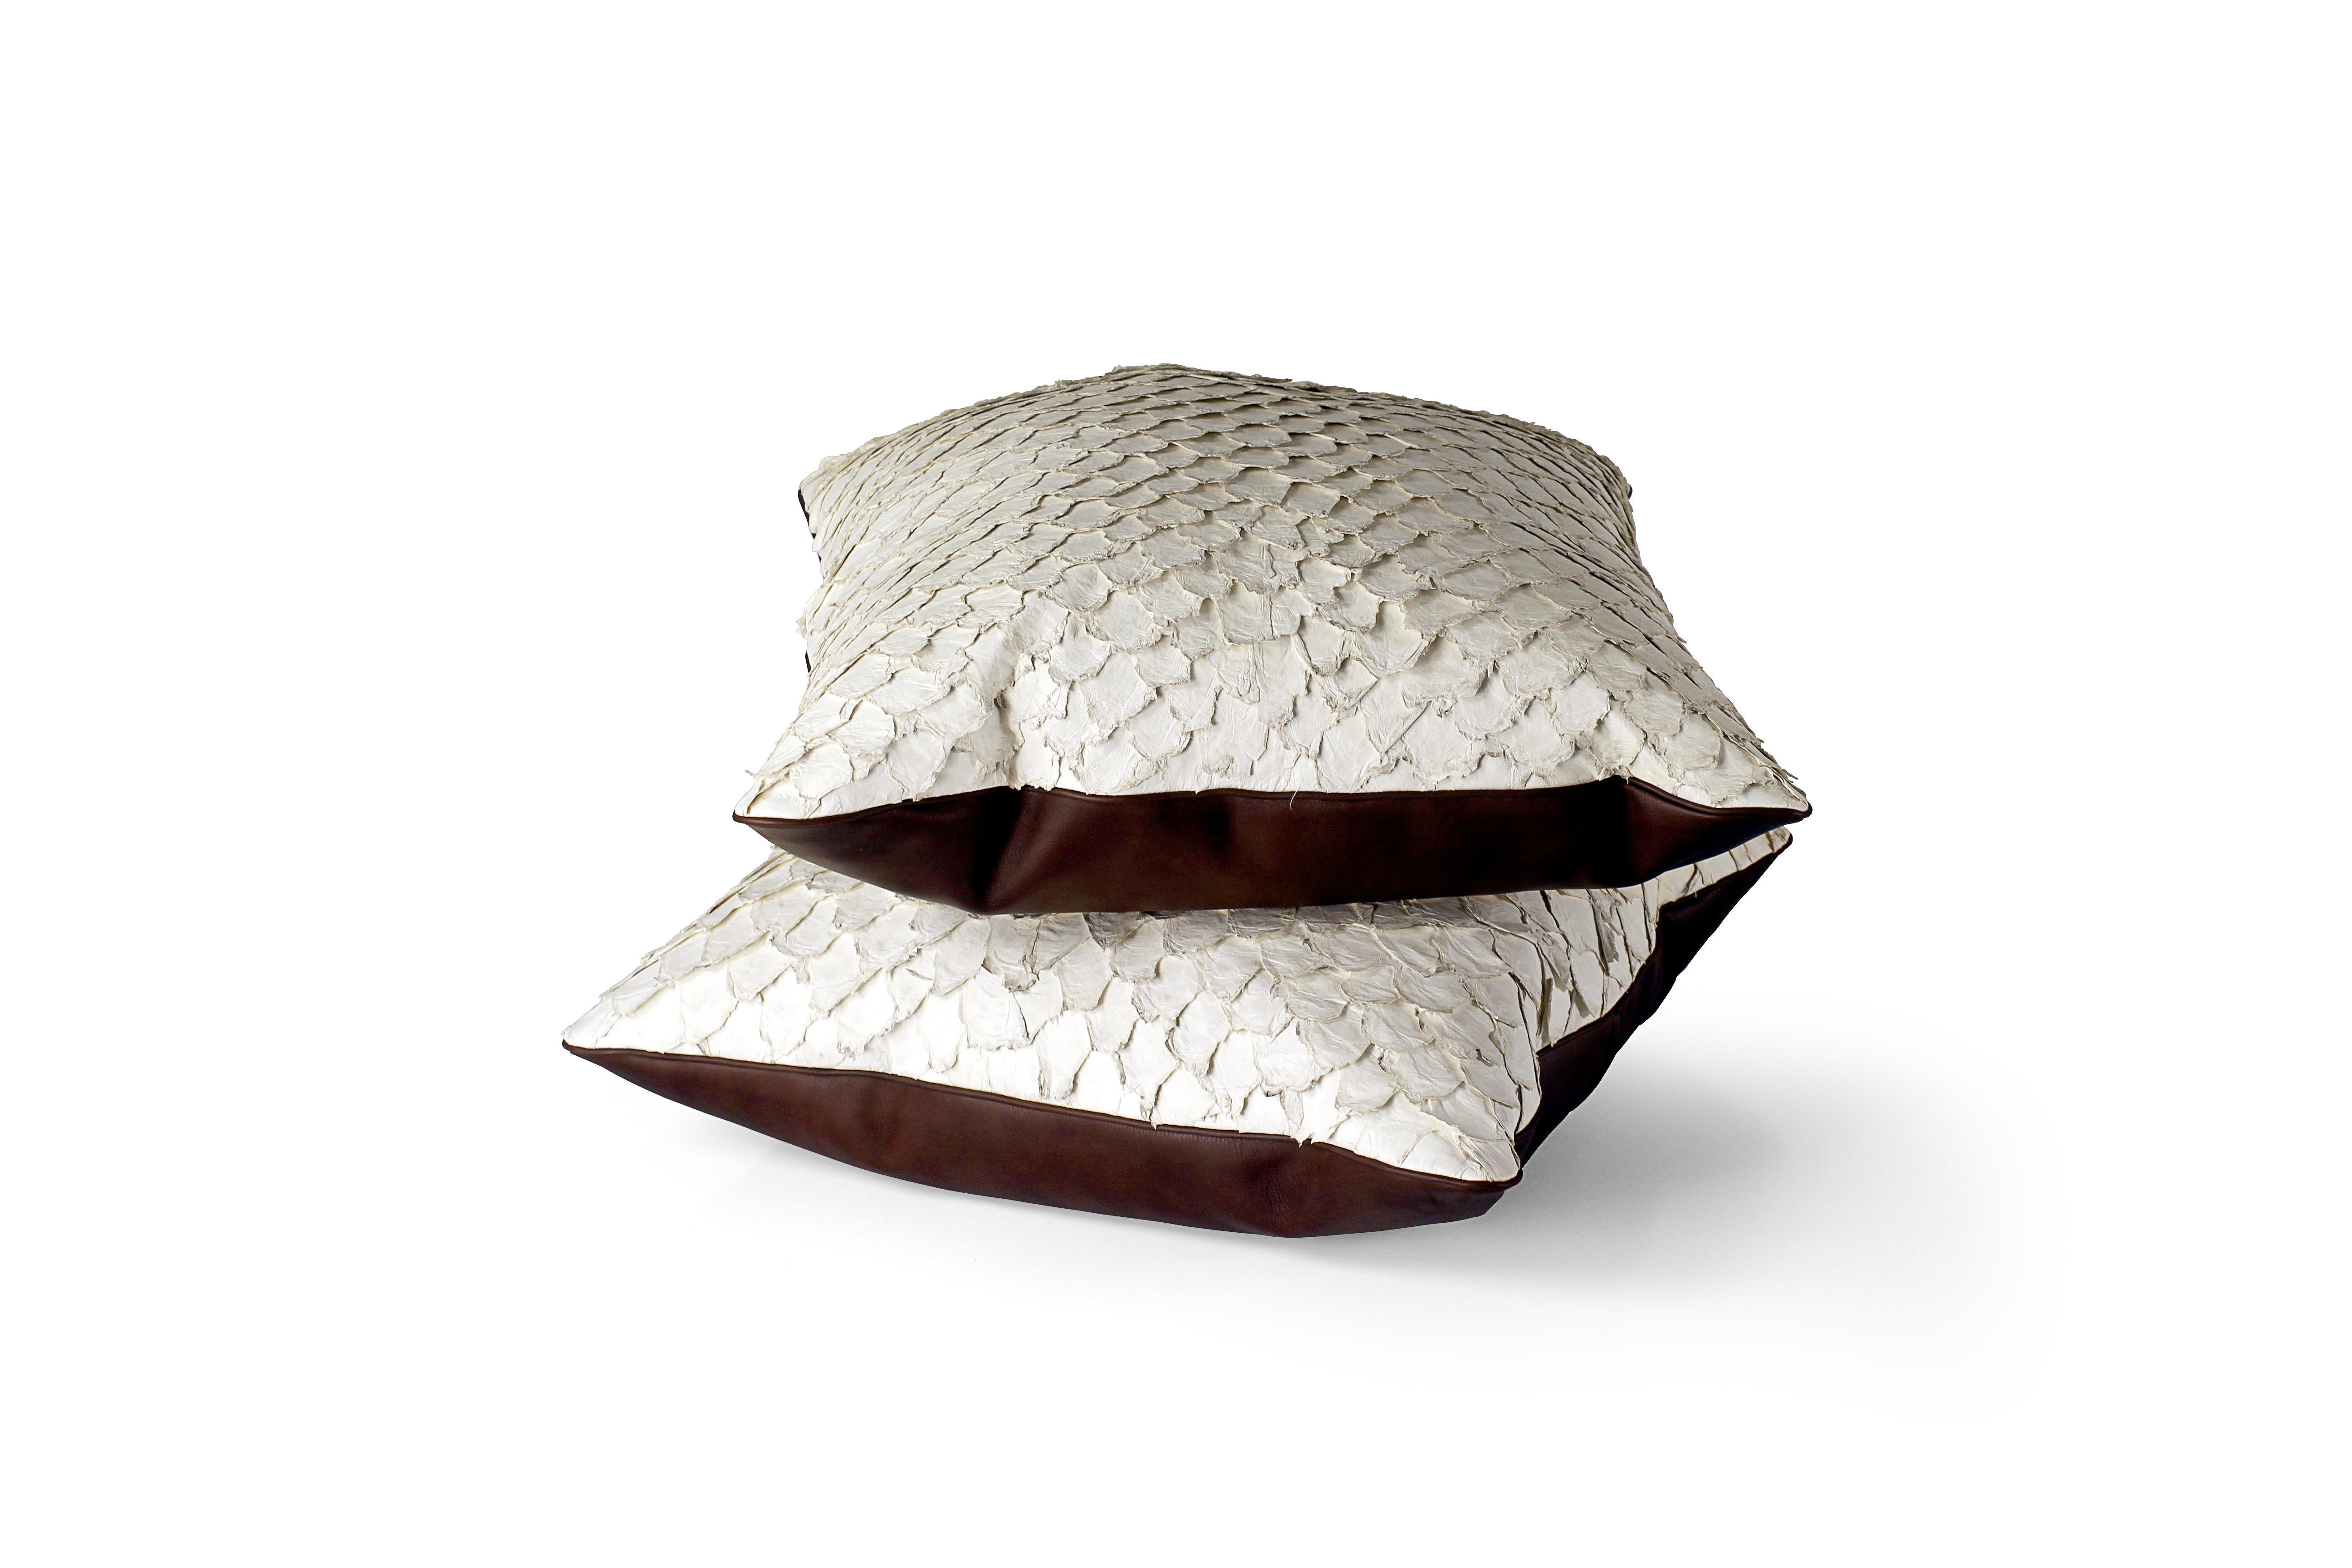 Set of 2 Leather Cushion, Exclusive fish leather off-white color and dark brown back, Large Size 24x24 in. Untrimmed scales

Fish leather luxury cushion. The fish skins comes from Brazilian food industry, it is the second largest river fish in the